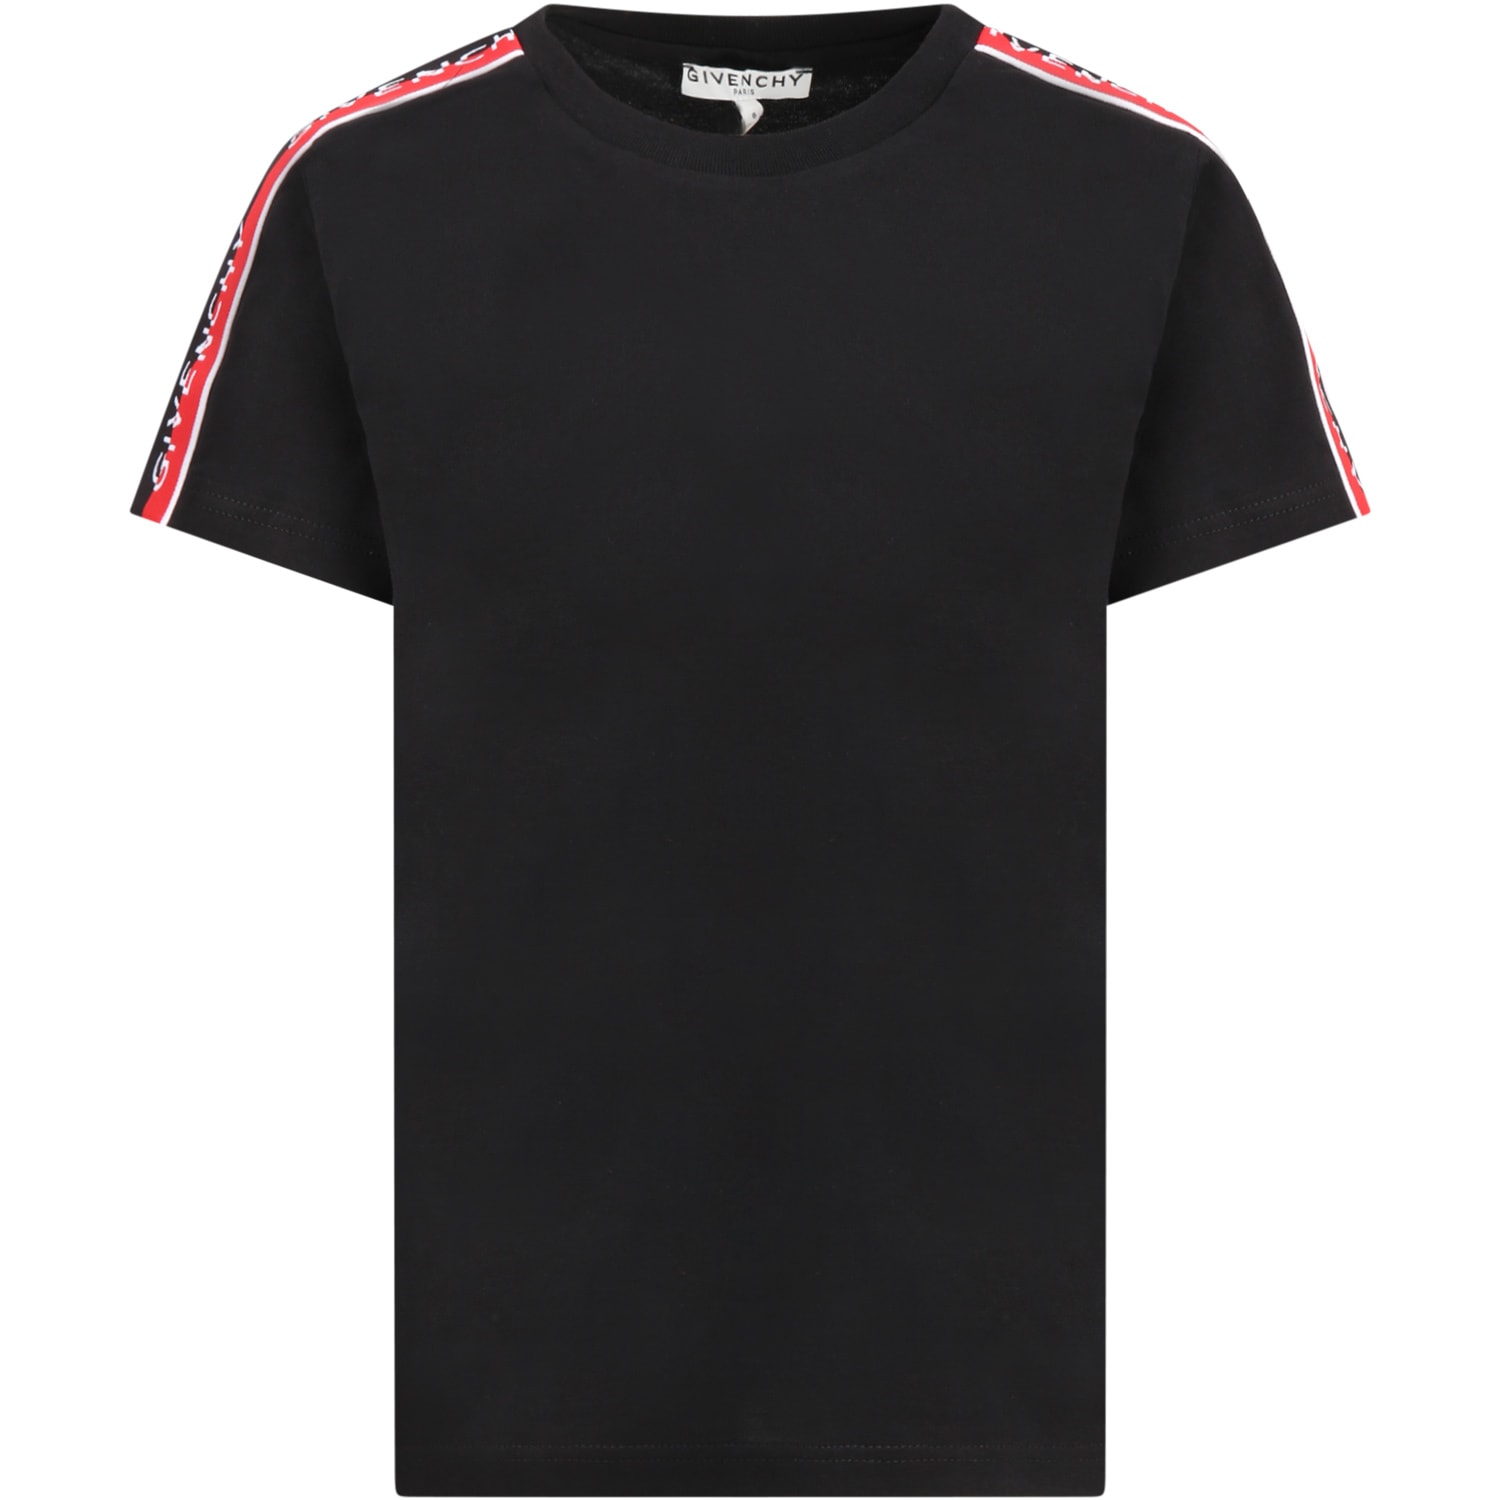 GIVENCHY BLACK T-SHIRT FOR BOY WITH STRIPES,11770987